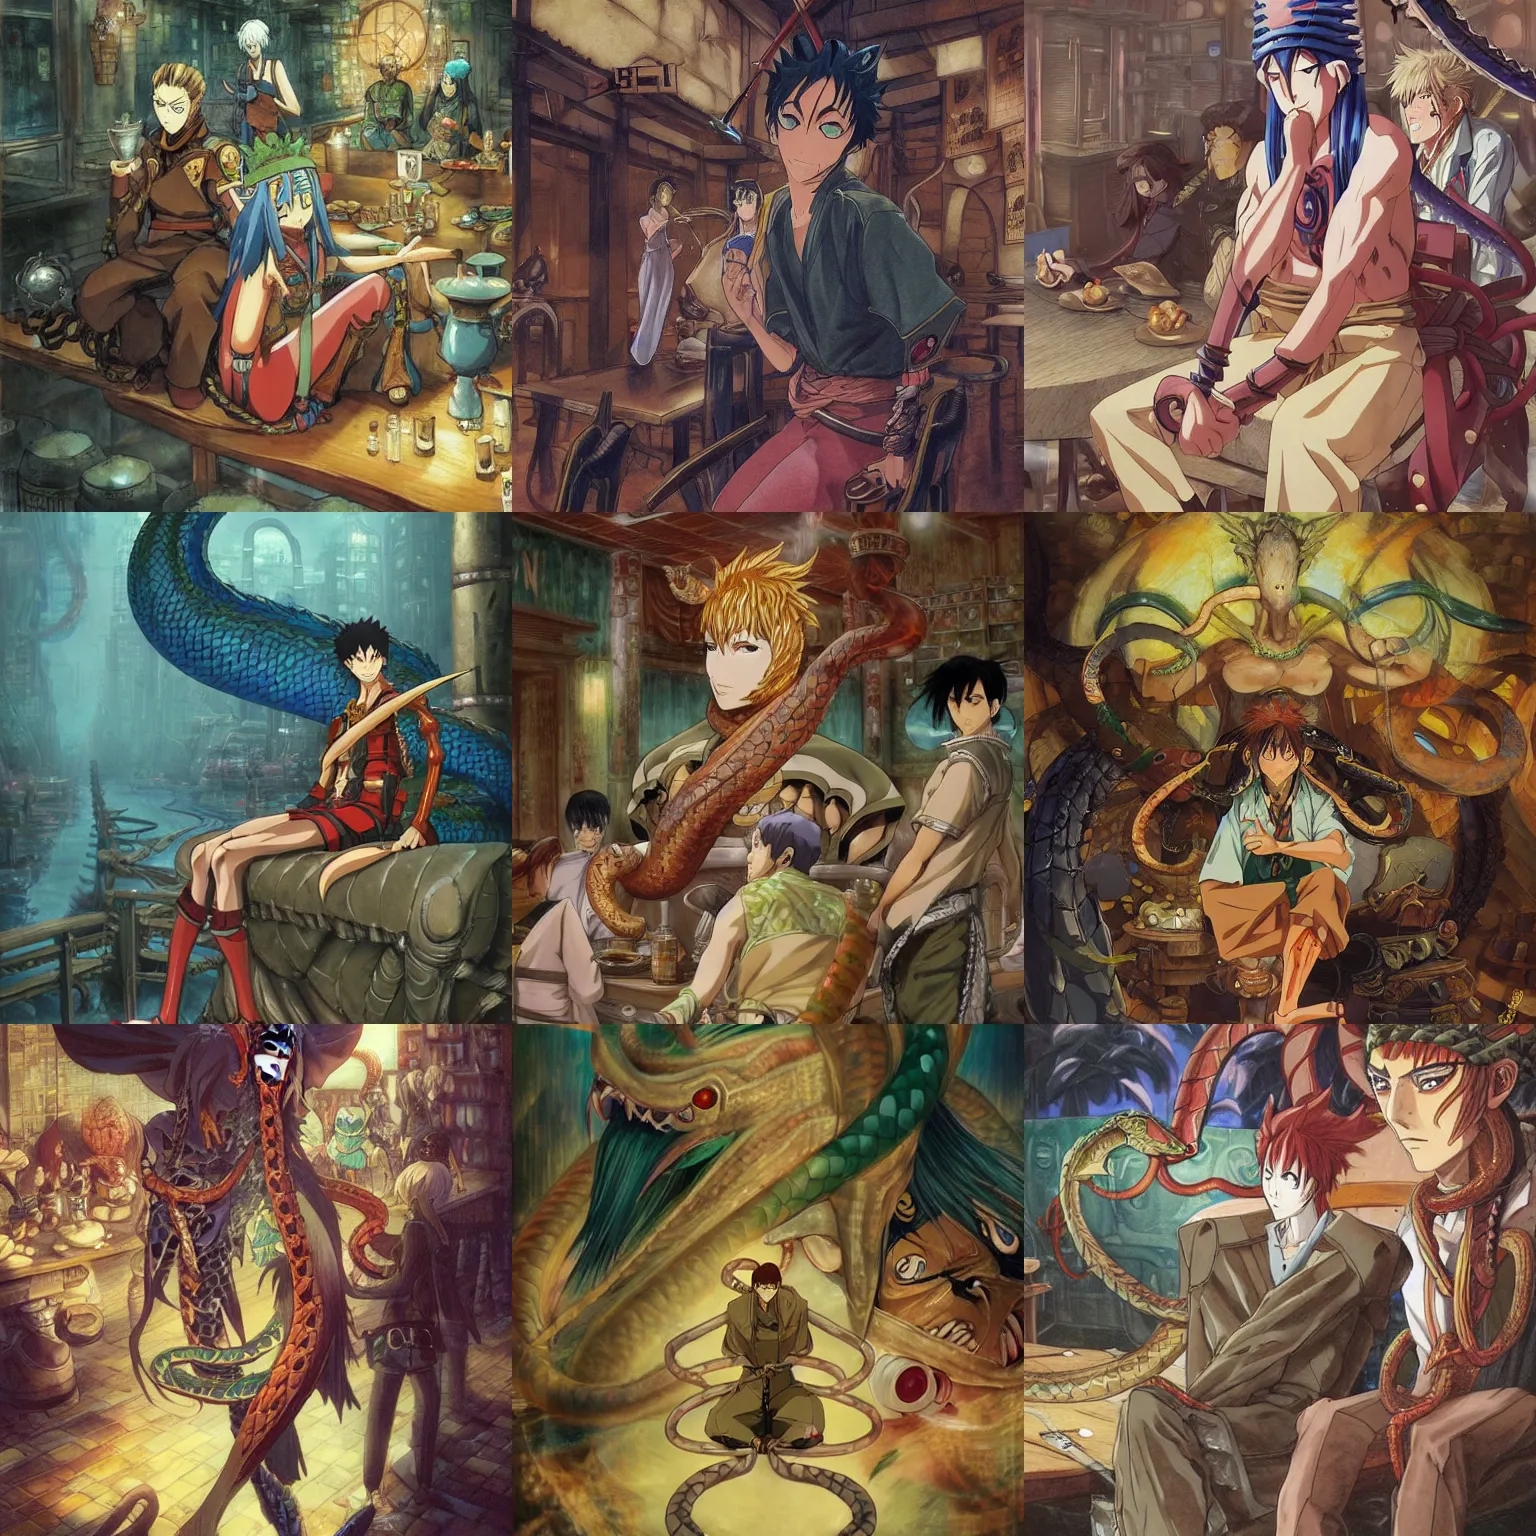 Prompt: an anime with a serpent tailed man with a serpent tail and no legs seated in an old crowded and lively tavern full of fantasy spirits and heroes, art by yuji ikehata and satoshi kon, background art by miyazaki, realism, proper human male proportions, fully clothed, dungeons and dragons